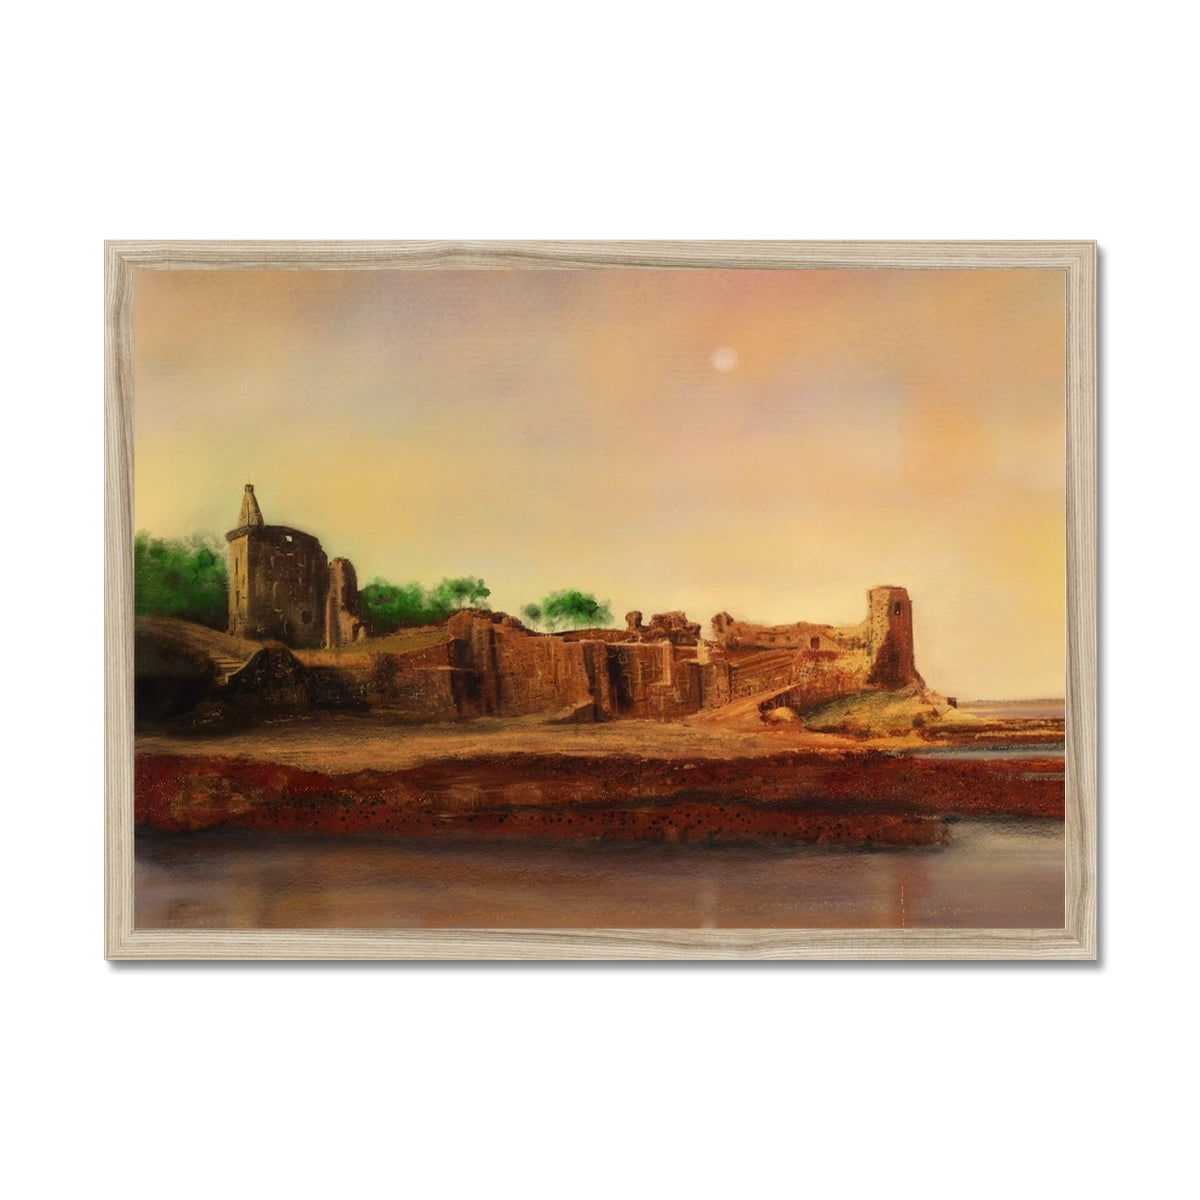 St Andrews Castle Painting | Framed Prints From Scotland-Framed Prints-Historic & Iconic Scotland Art Gallery-A2 Landscape-Natural Frame-Paintings, Prints, Homeware, Art Gifts From Scotland By Scottish Artist Kevin Hunter